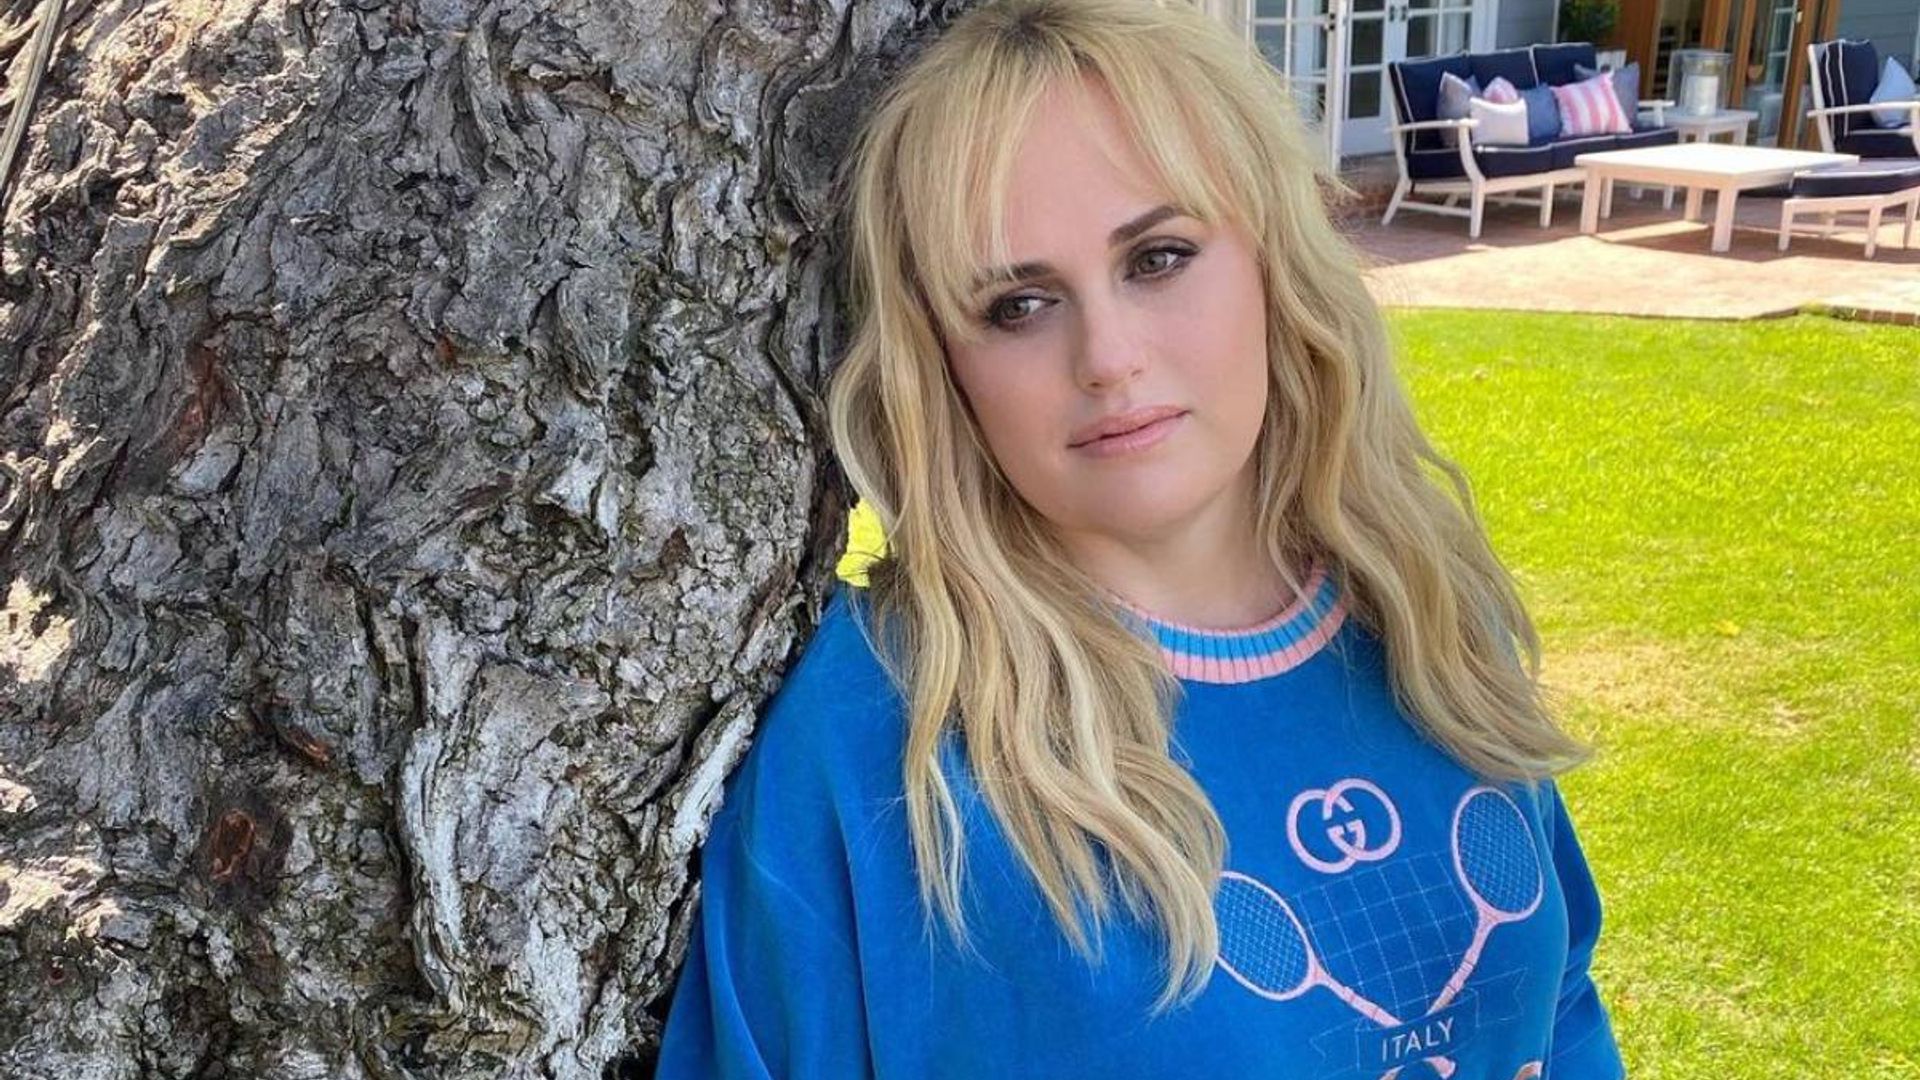 Rebel Wilson's latest workout photo sparks major concern from fans